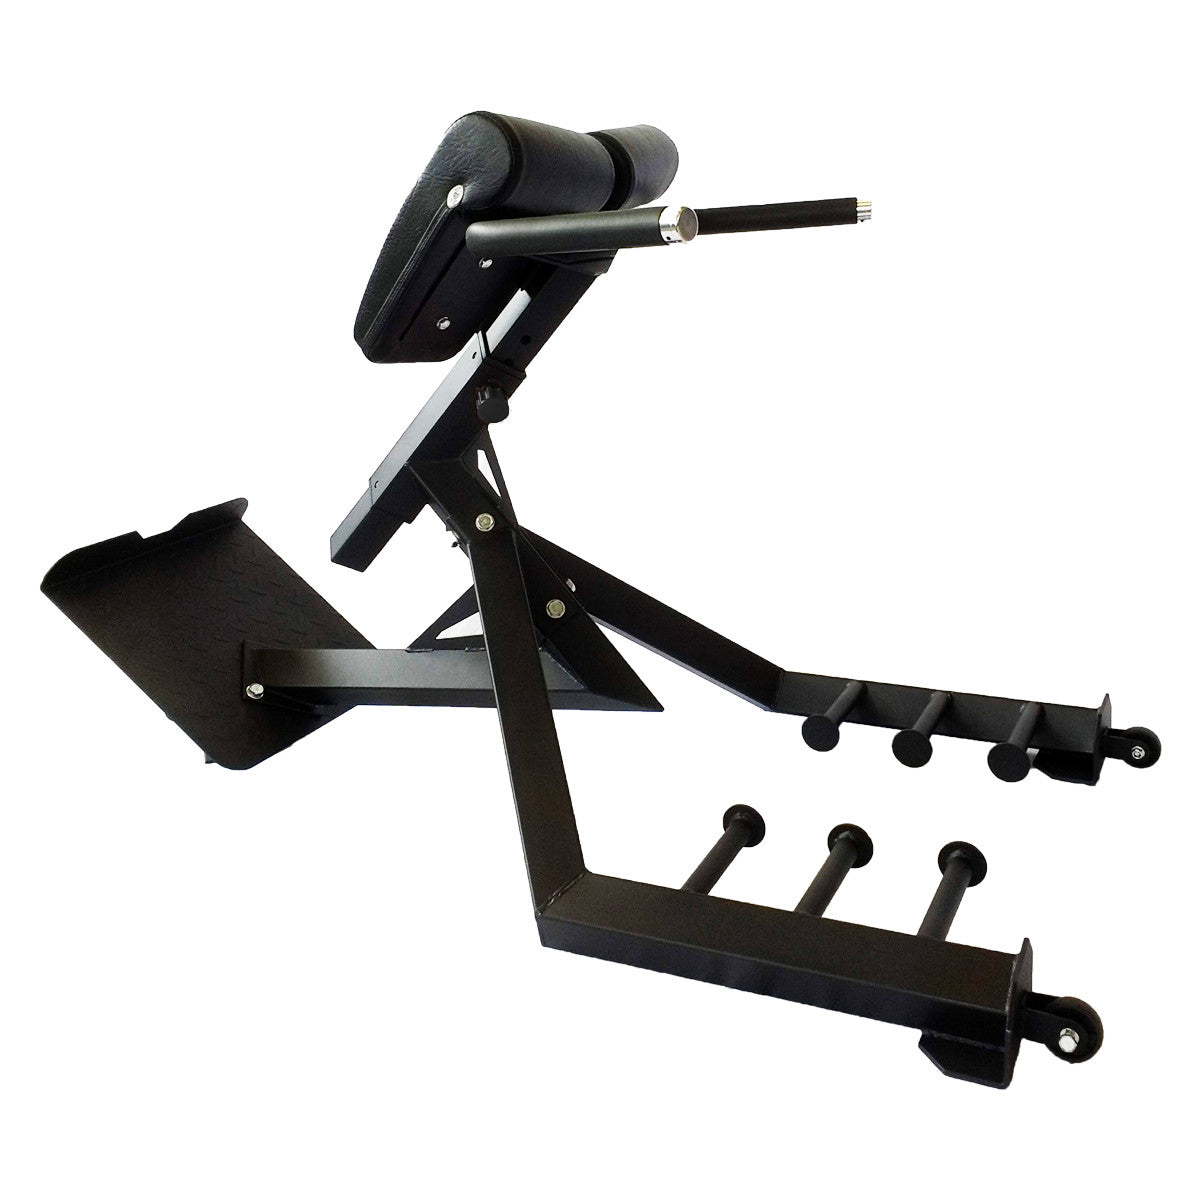 Buy TnP Accessories. Back Hyper Extension Exercise Gym Bench